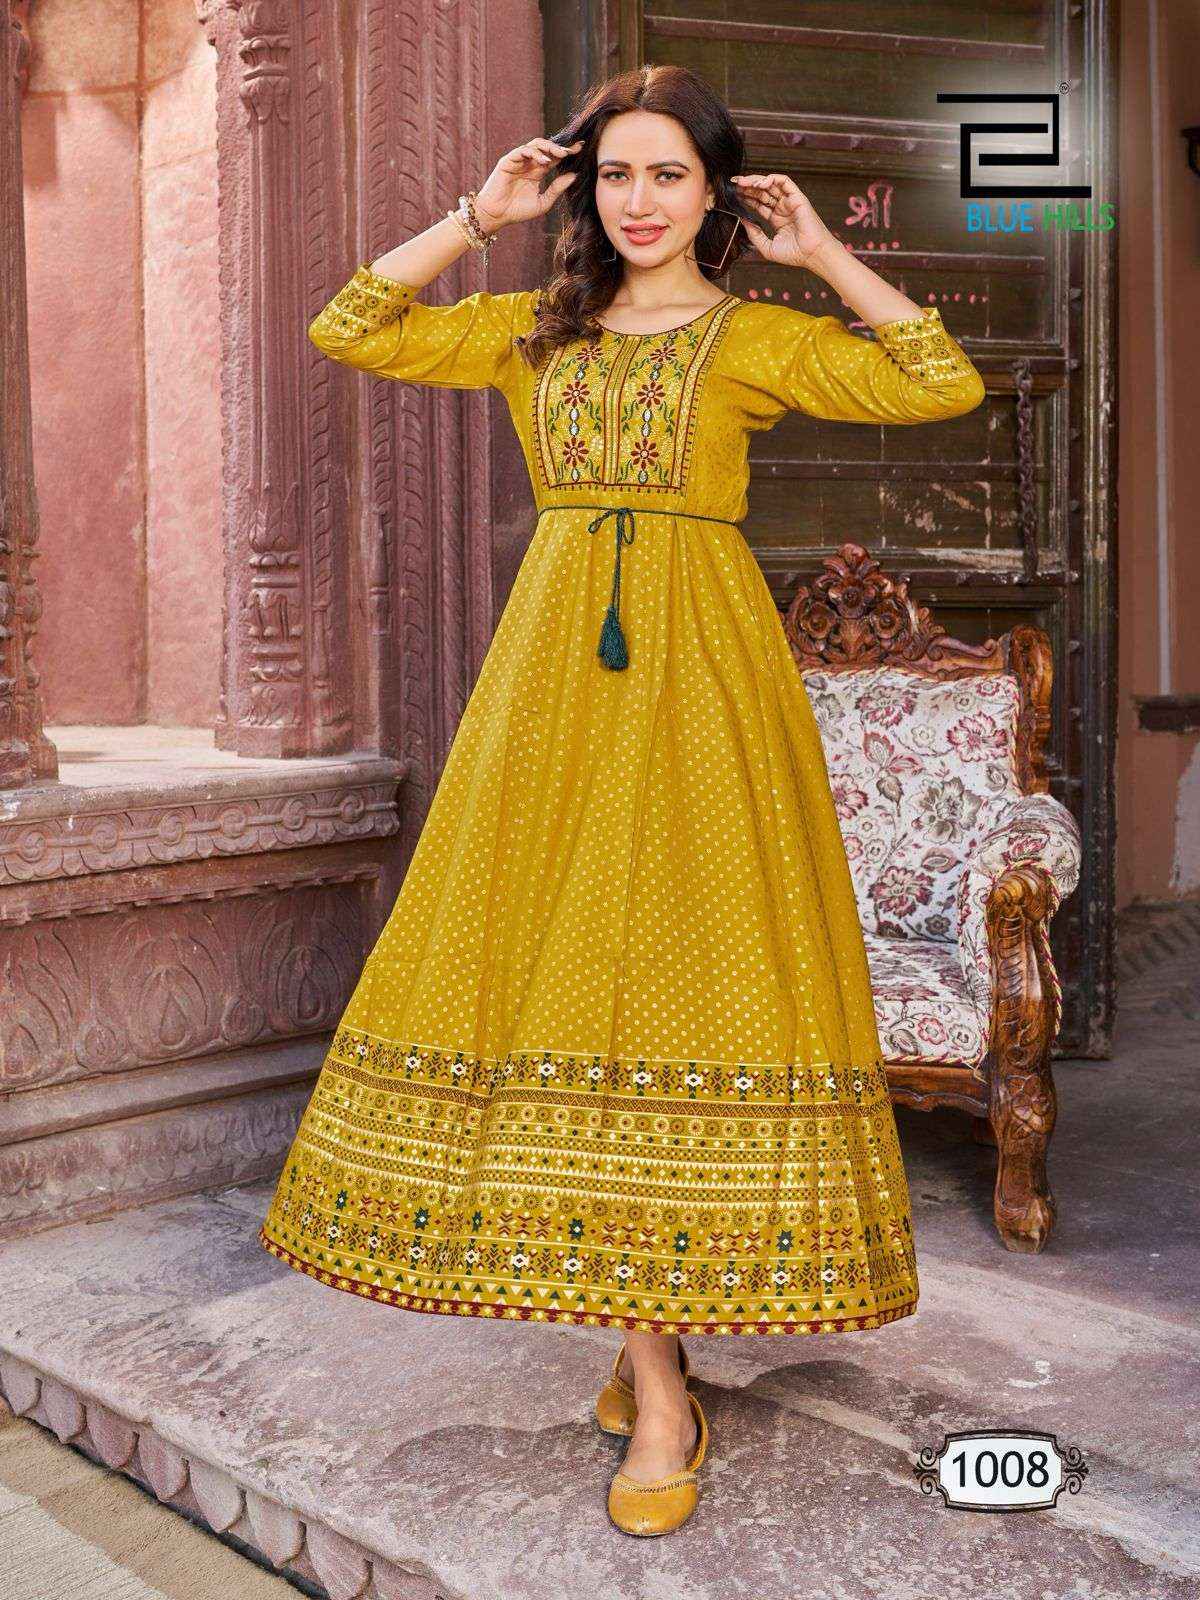 Gowns Manufacturers & suppliers in Surat, Gujarat, India - Partywear Gowns